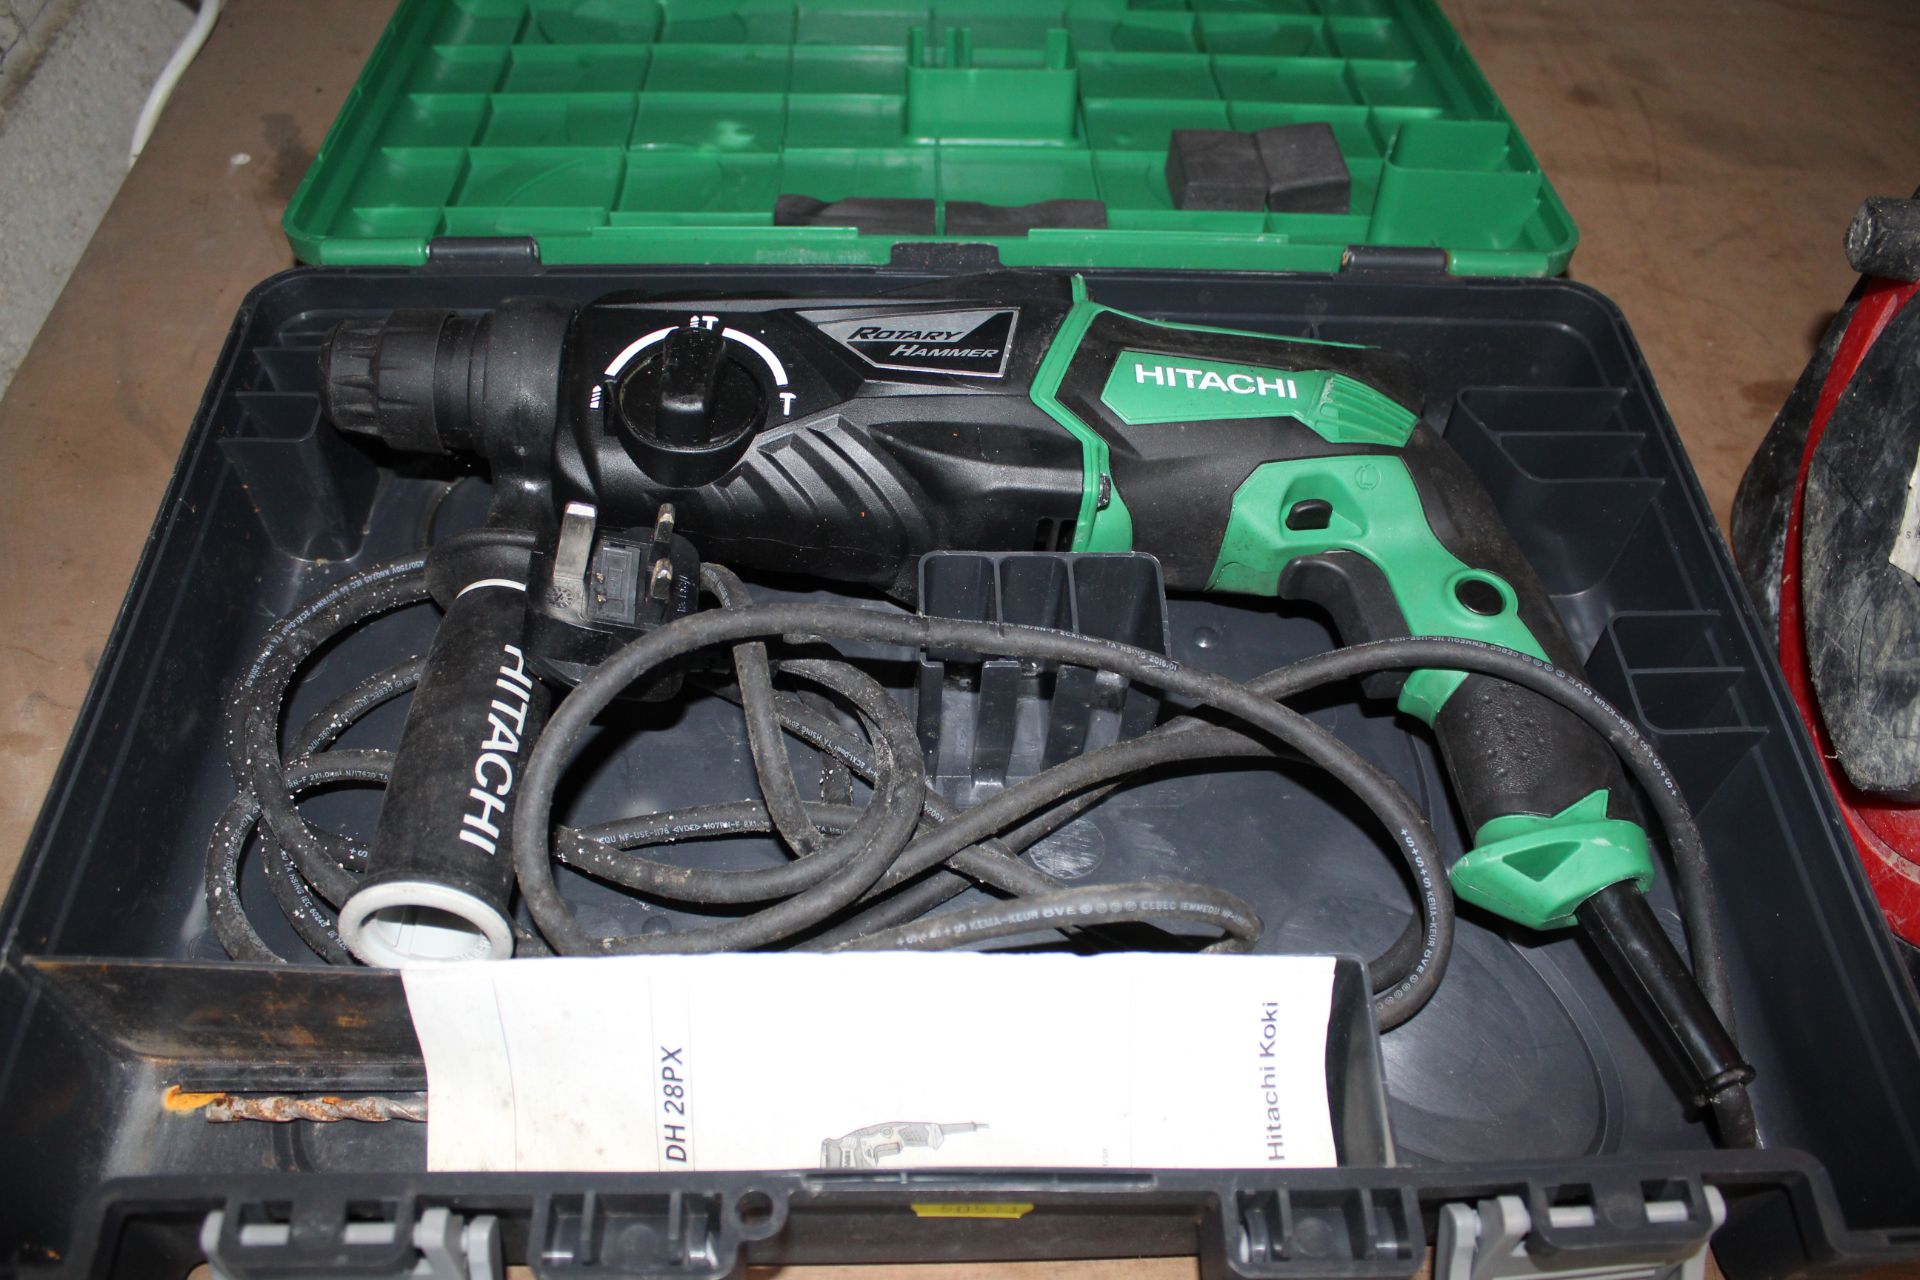 Hitachi 240v rotary hammer drill in case and extension lead. V CAMPSEA ASHE - Image 3 of 4